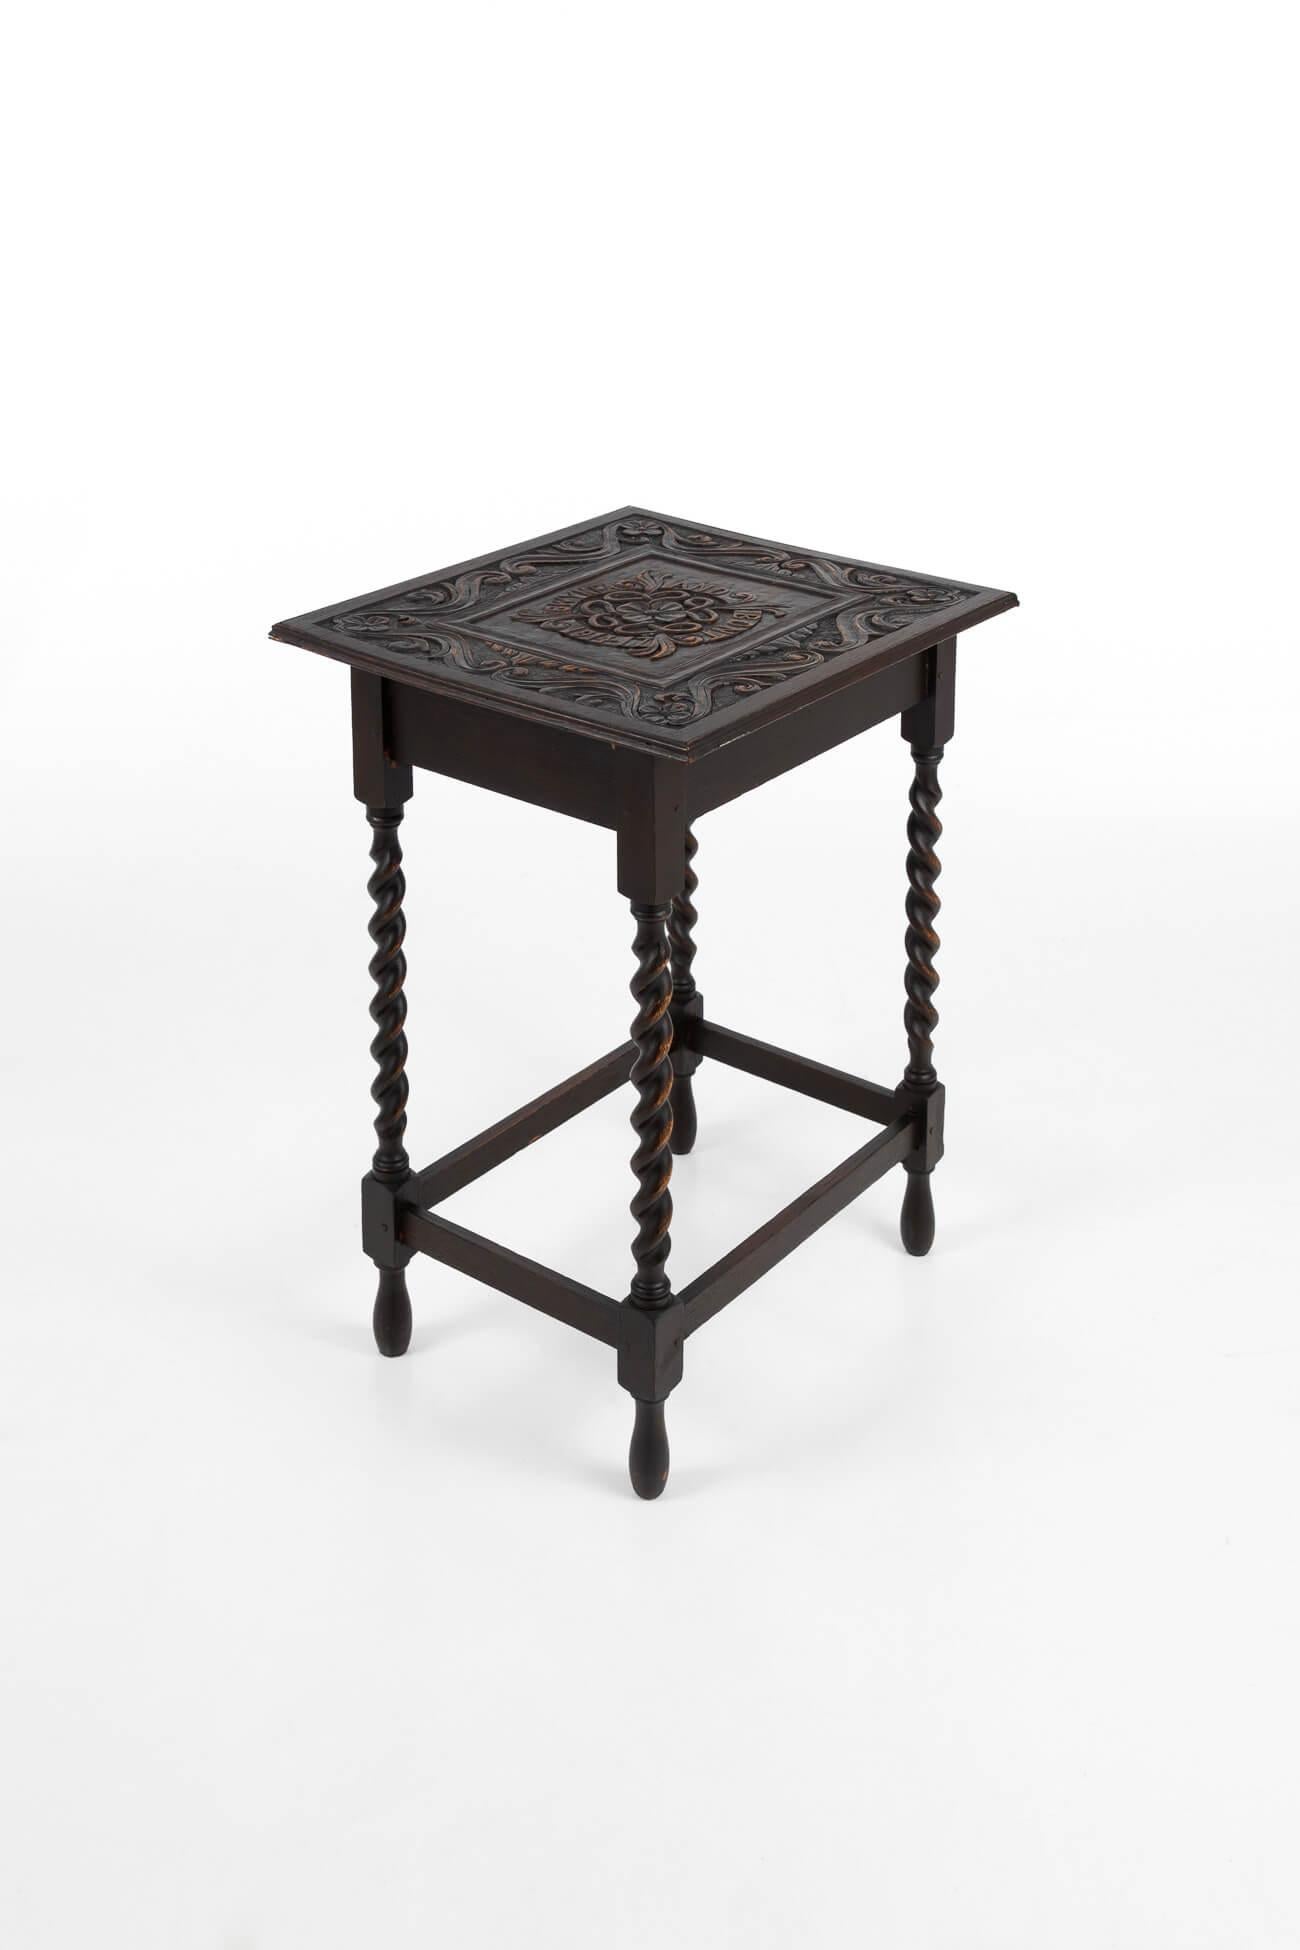 Early 20th century Welsh barley twist occasional table. Made of oak with an intricately hand-carved top inscribed ‘ Gwynfa and Bont 1914-17’ in commemoration of those who fought in WW1. Supported by hand-turned barley twist legs, joined by simple